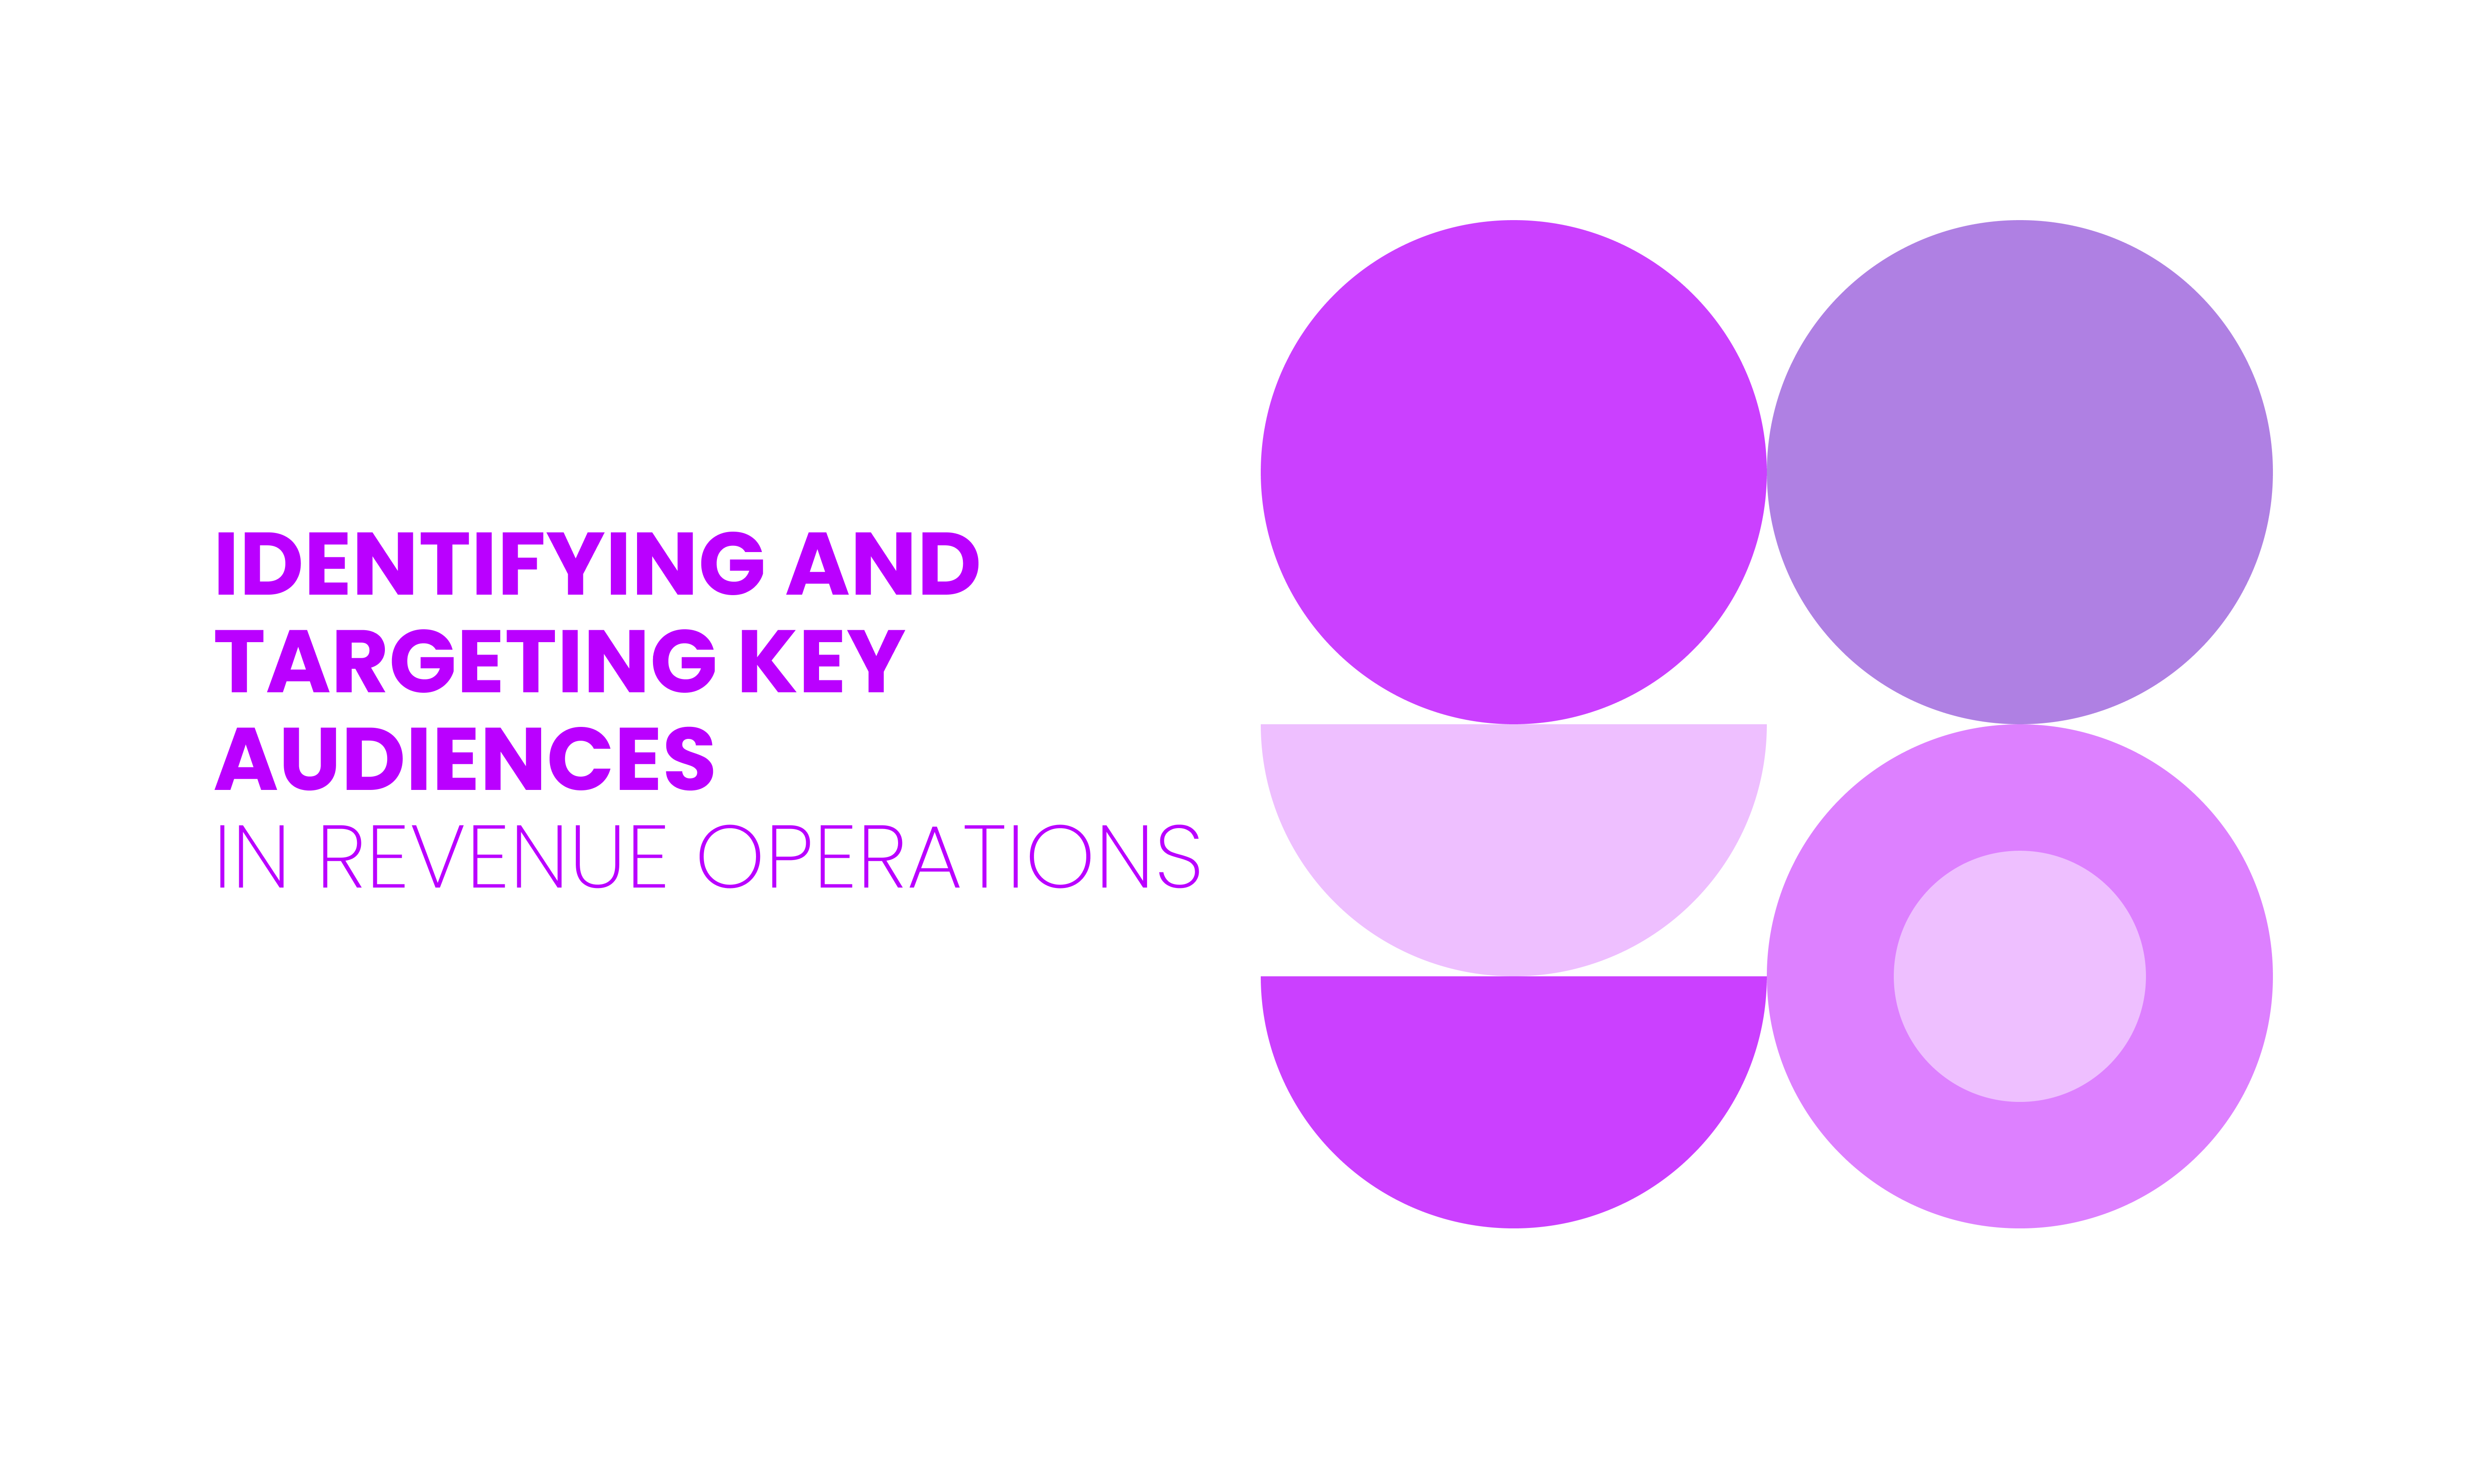 IDENTIFYING AND TARGETING KEY AUDIENCES  IN REVENUE OPERATIONS